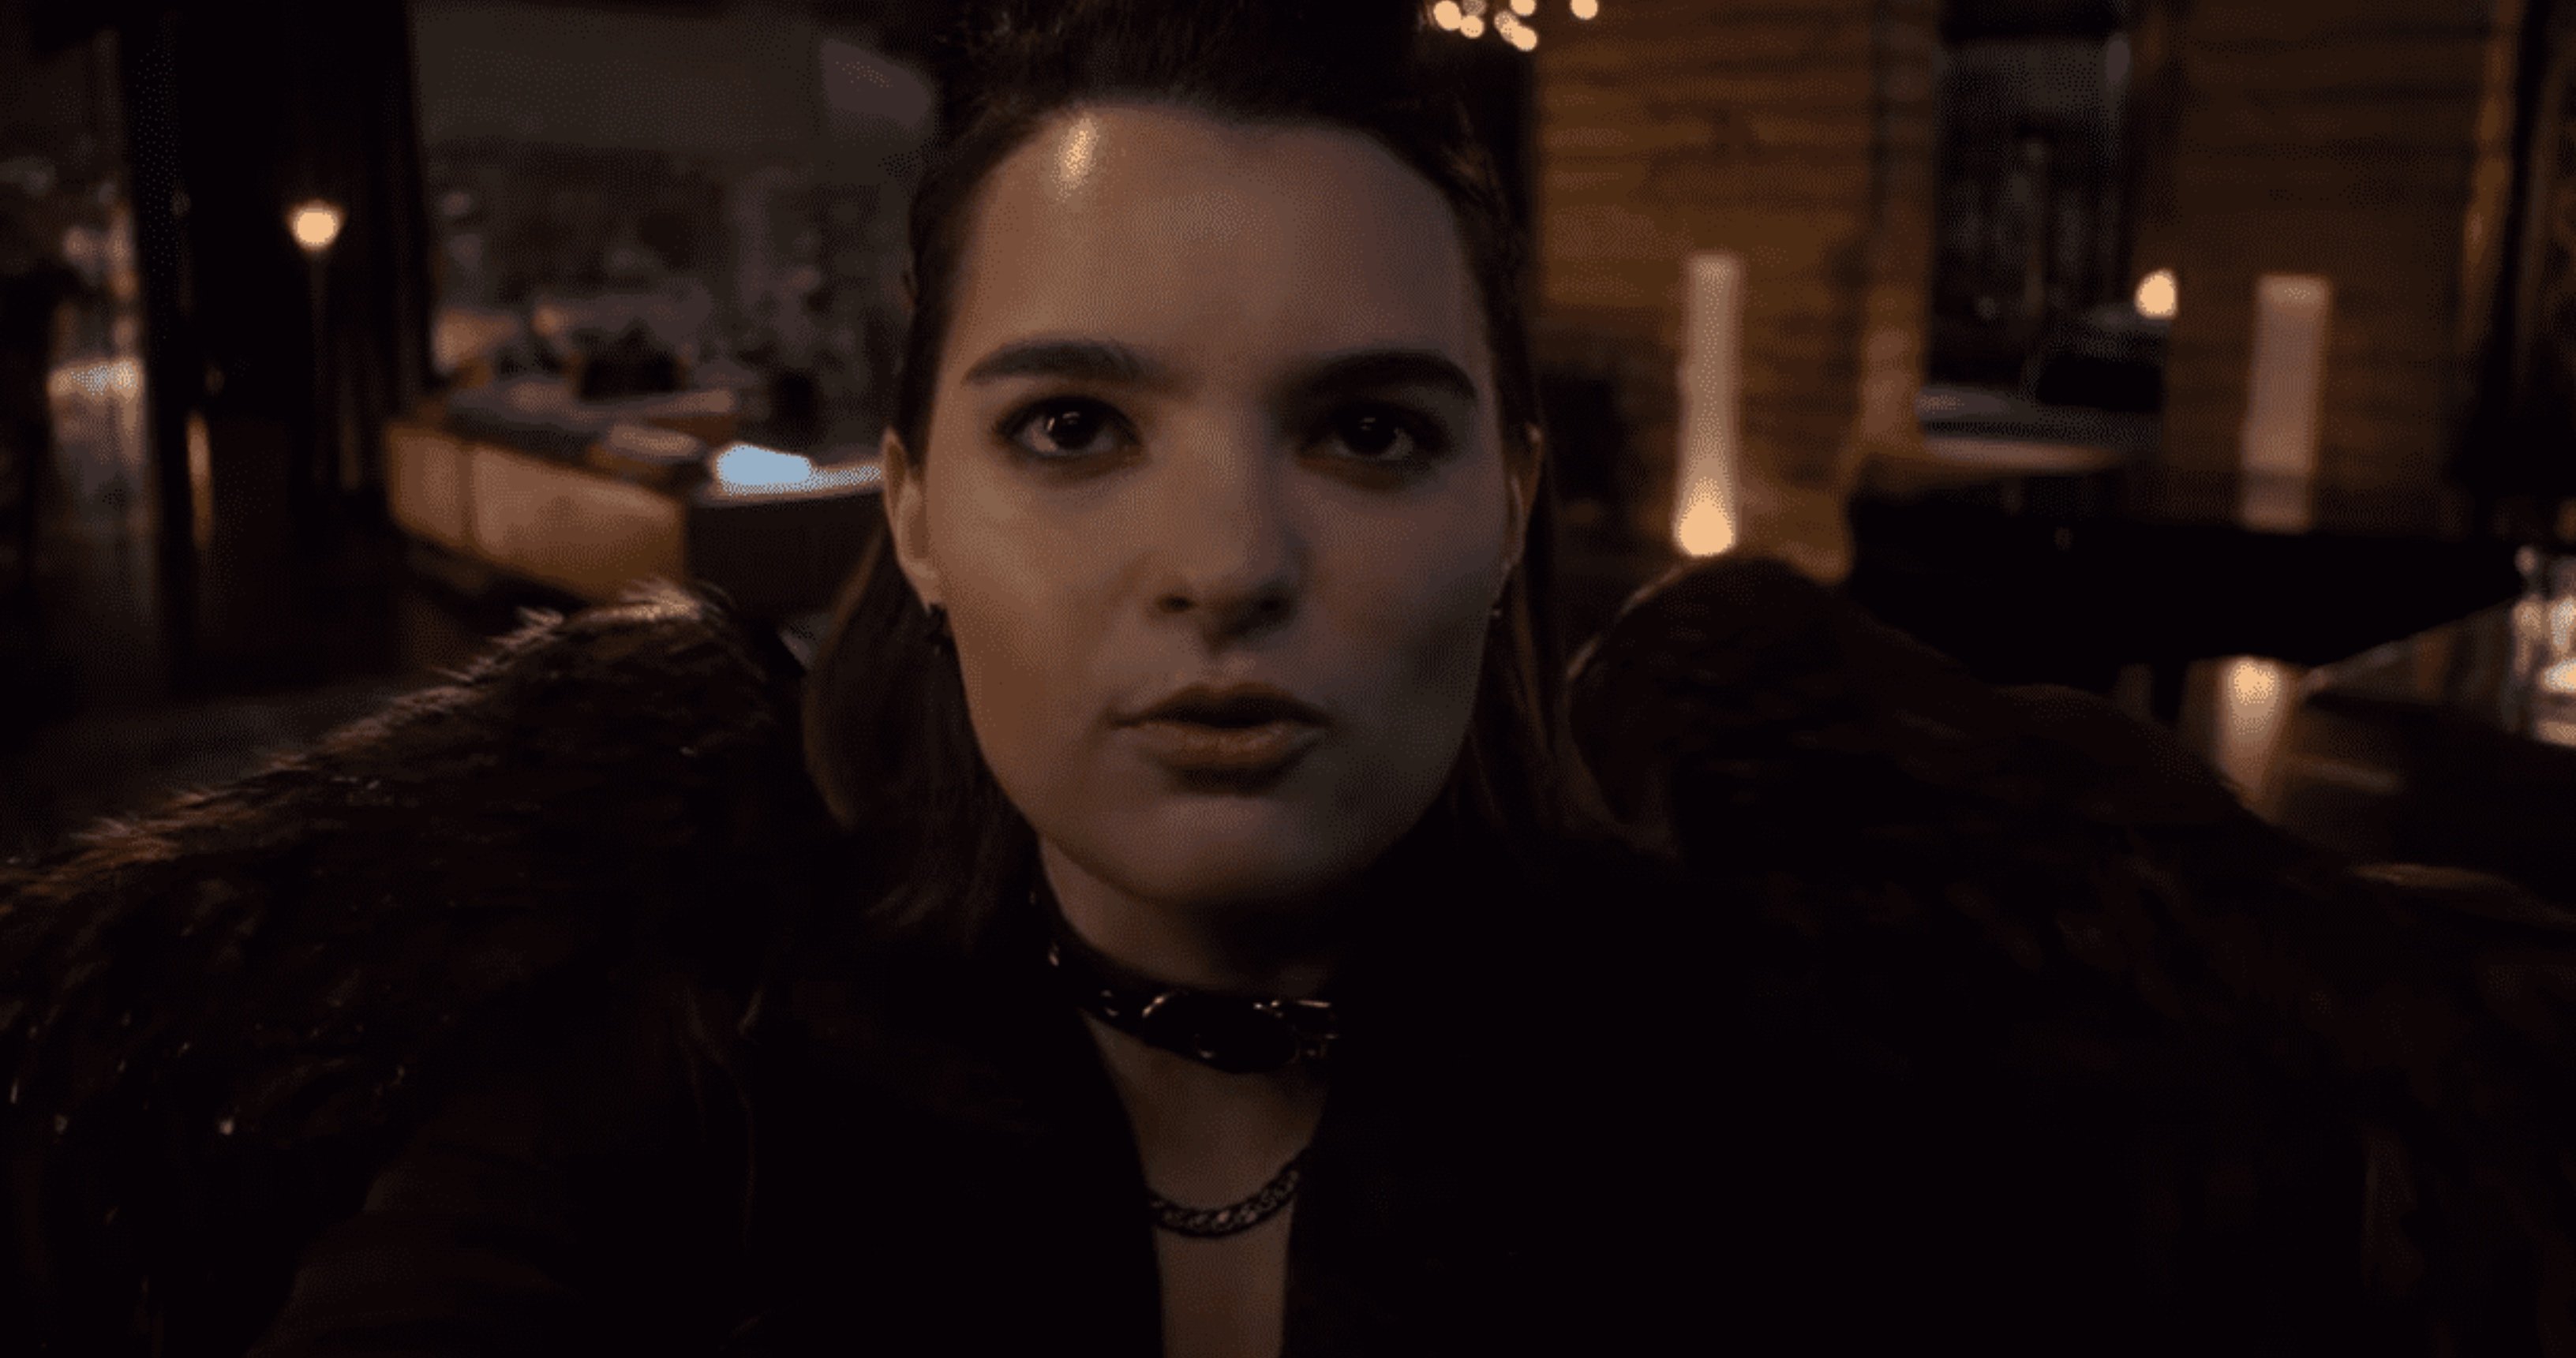 Brianna Hildebrand as Rory 'Lucifer' with slicked back hair